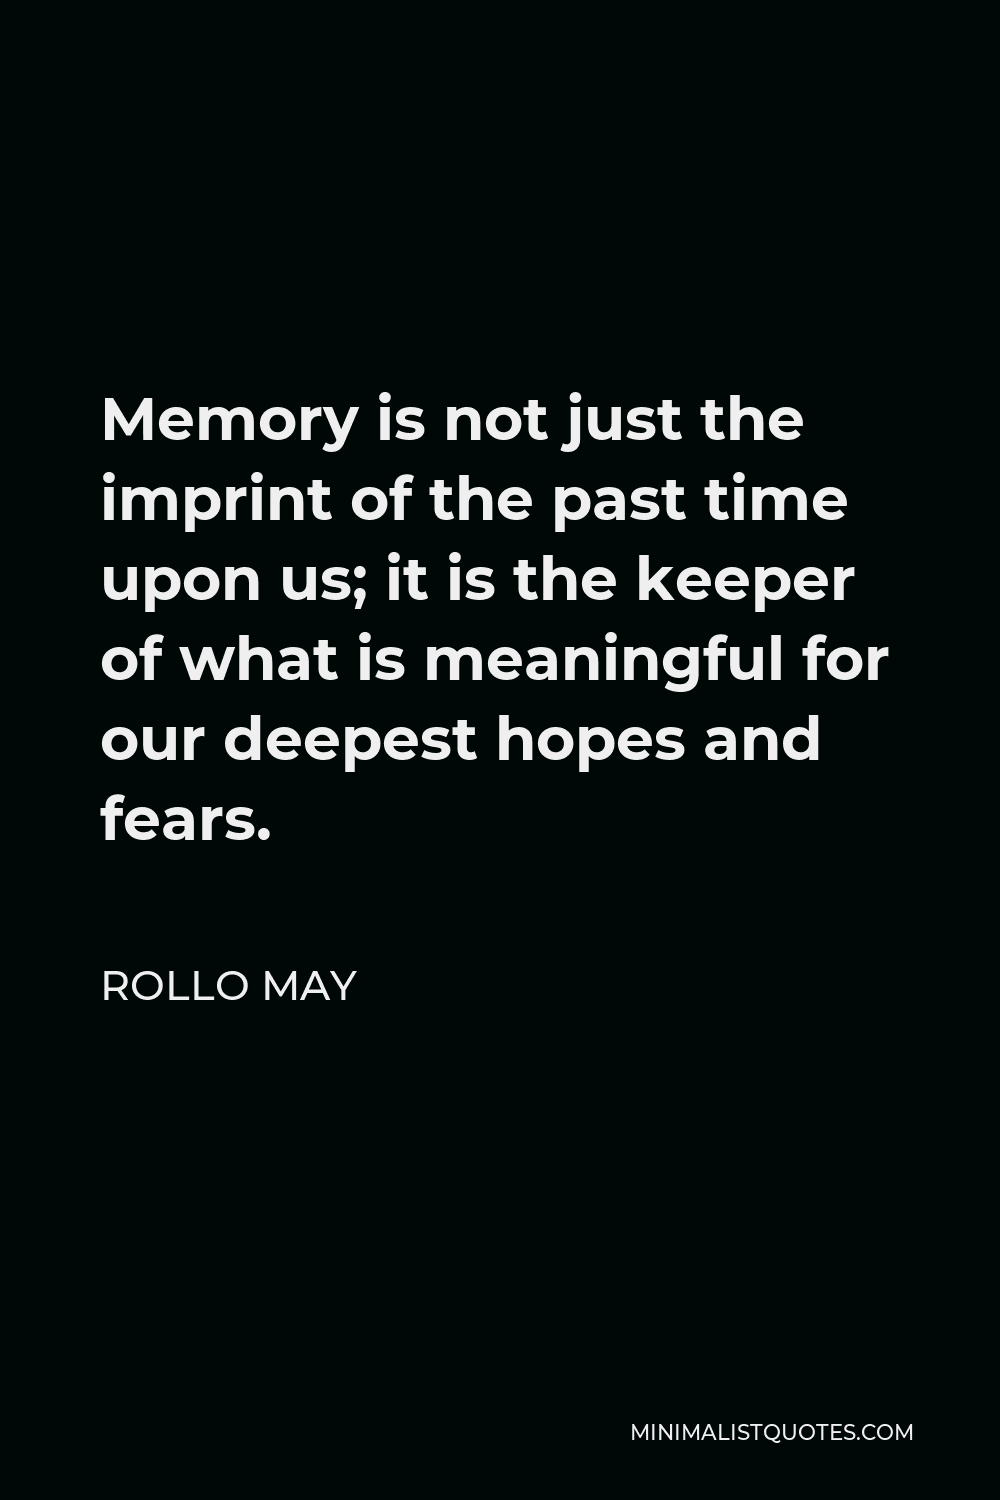 Rollo May Quote - Memory is not just the imprint of the past time upon us; it is the keeper of what is meaningful for our deepest hopes and fears.